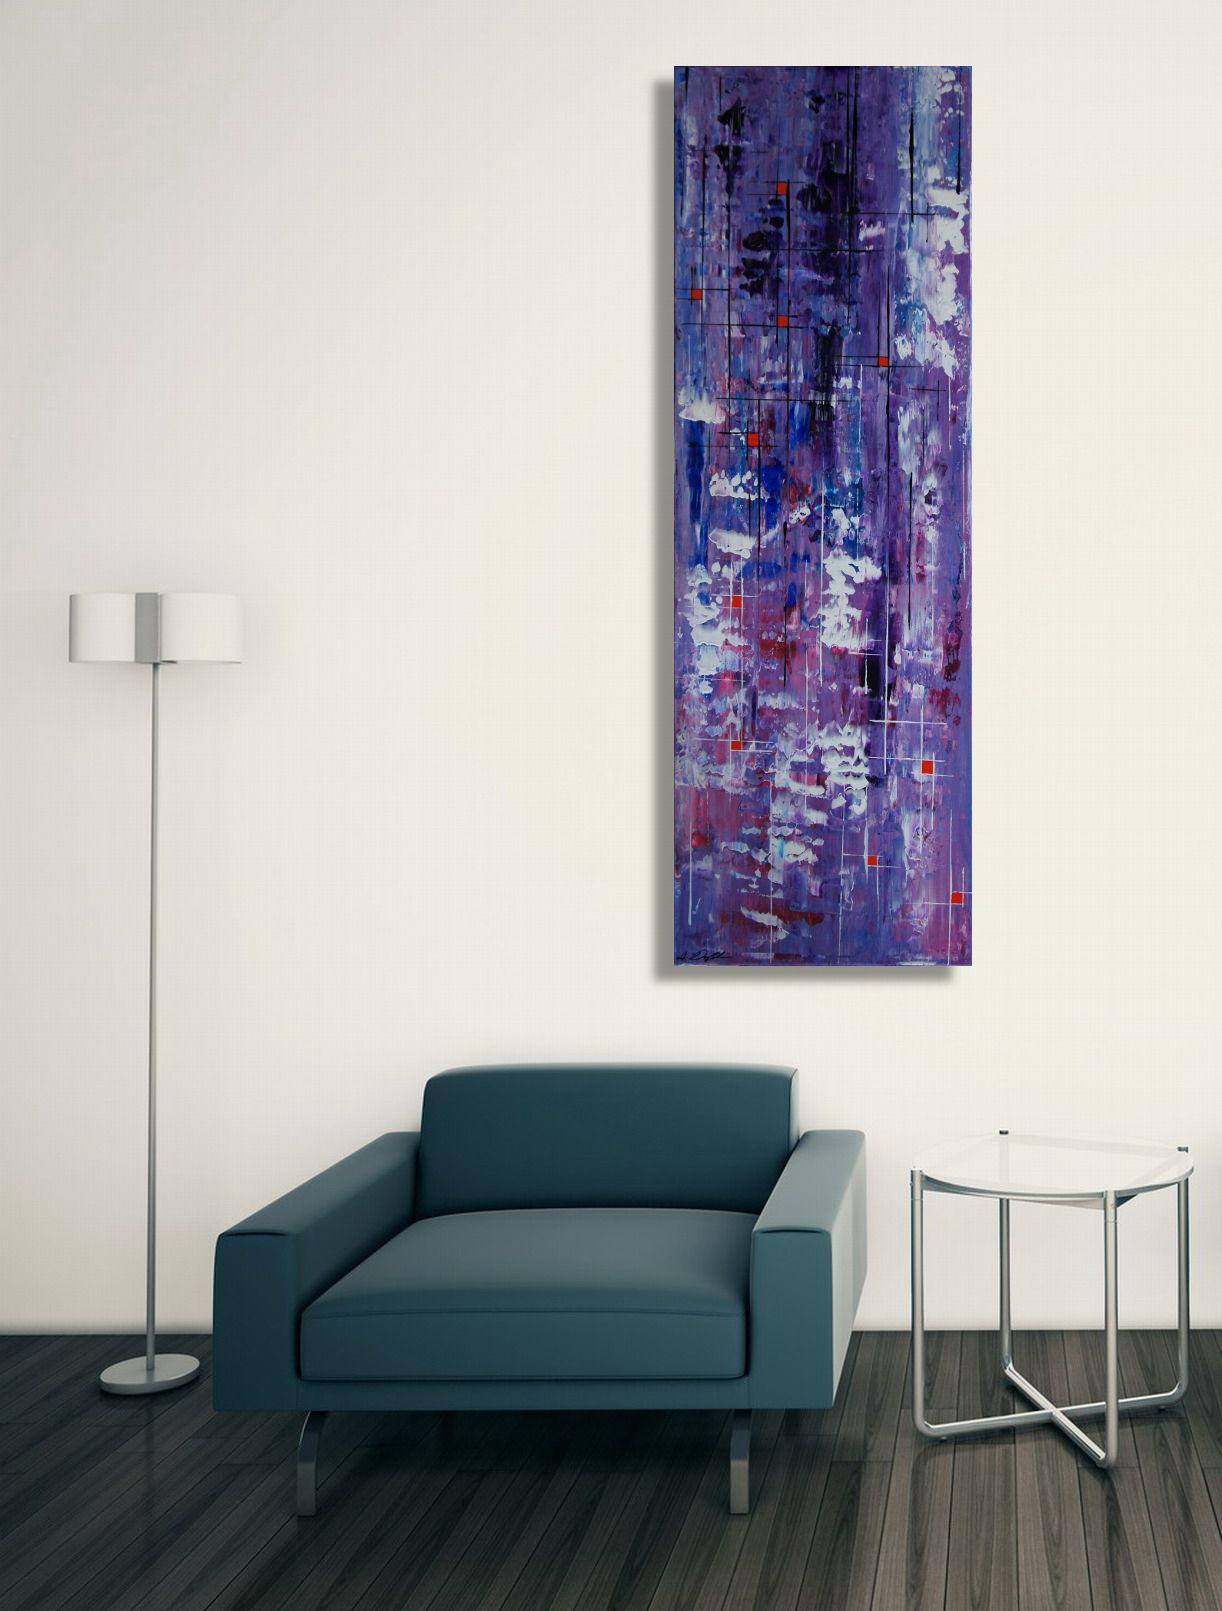 This lengthy vertical artwork in acrylics comes in dominating tones of purple with patches of white and magenta and dark purple. The foreground is dominated by vertical and harizontal lines and contrasting light red squares, making the painting very